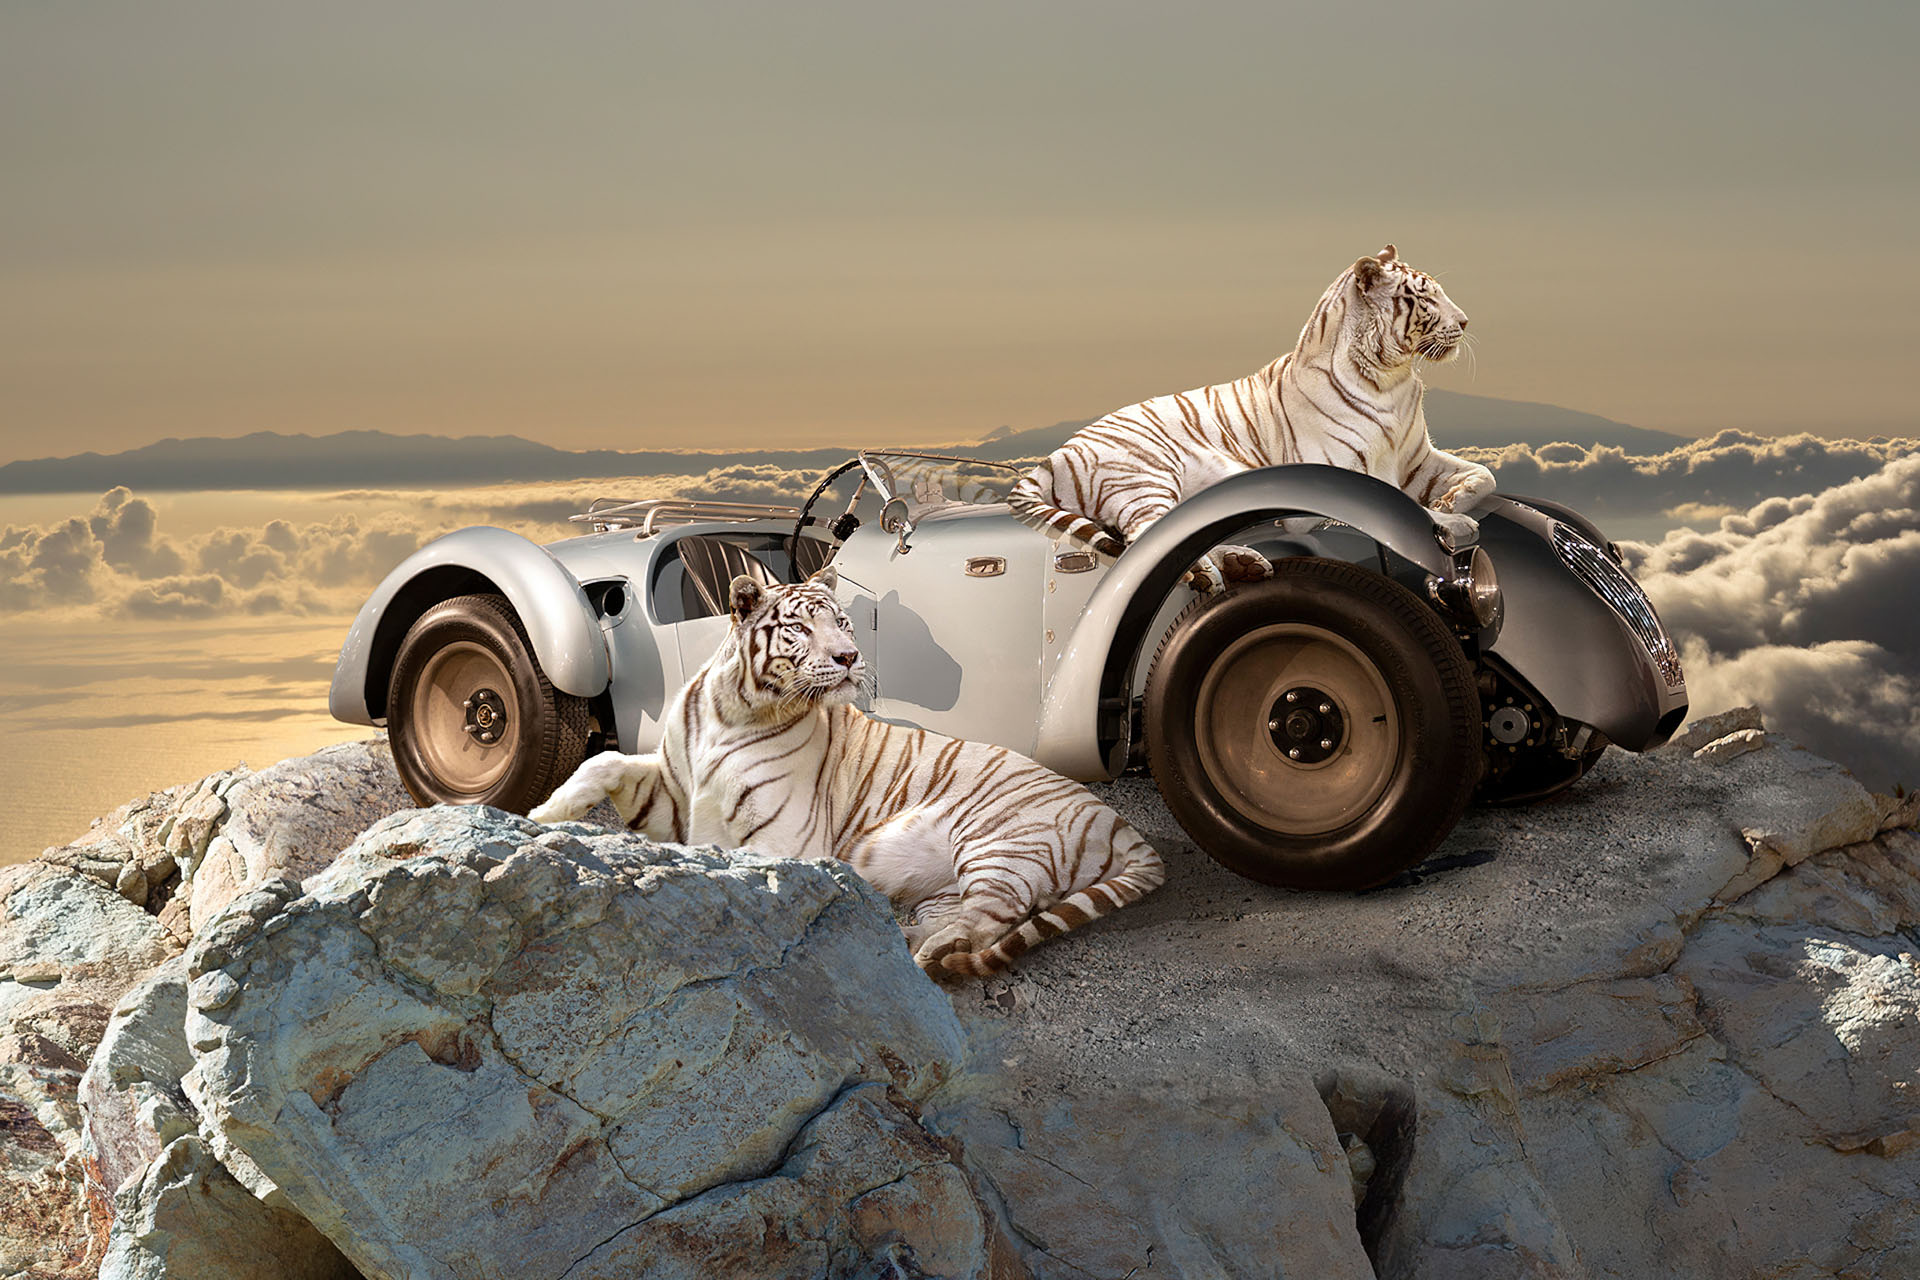 Healey silverstone briggs cunning 1949 with white tigers on a cliff above the clouds